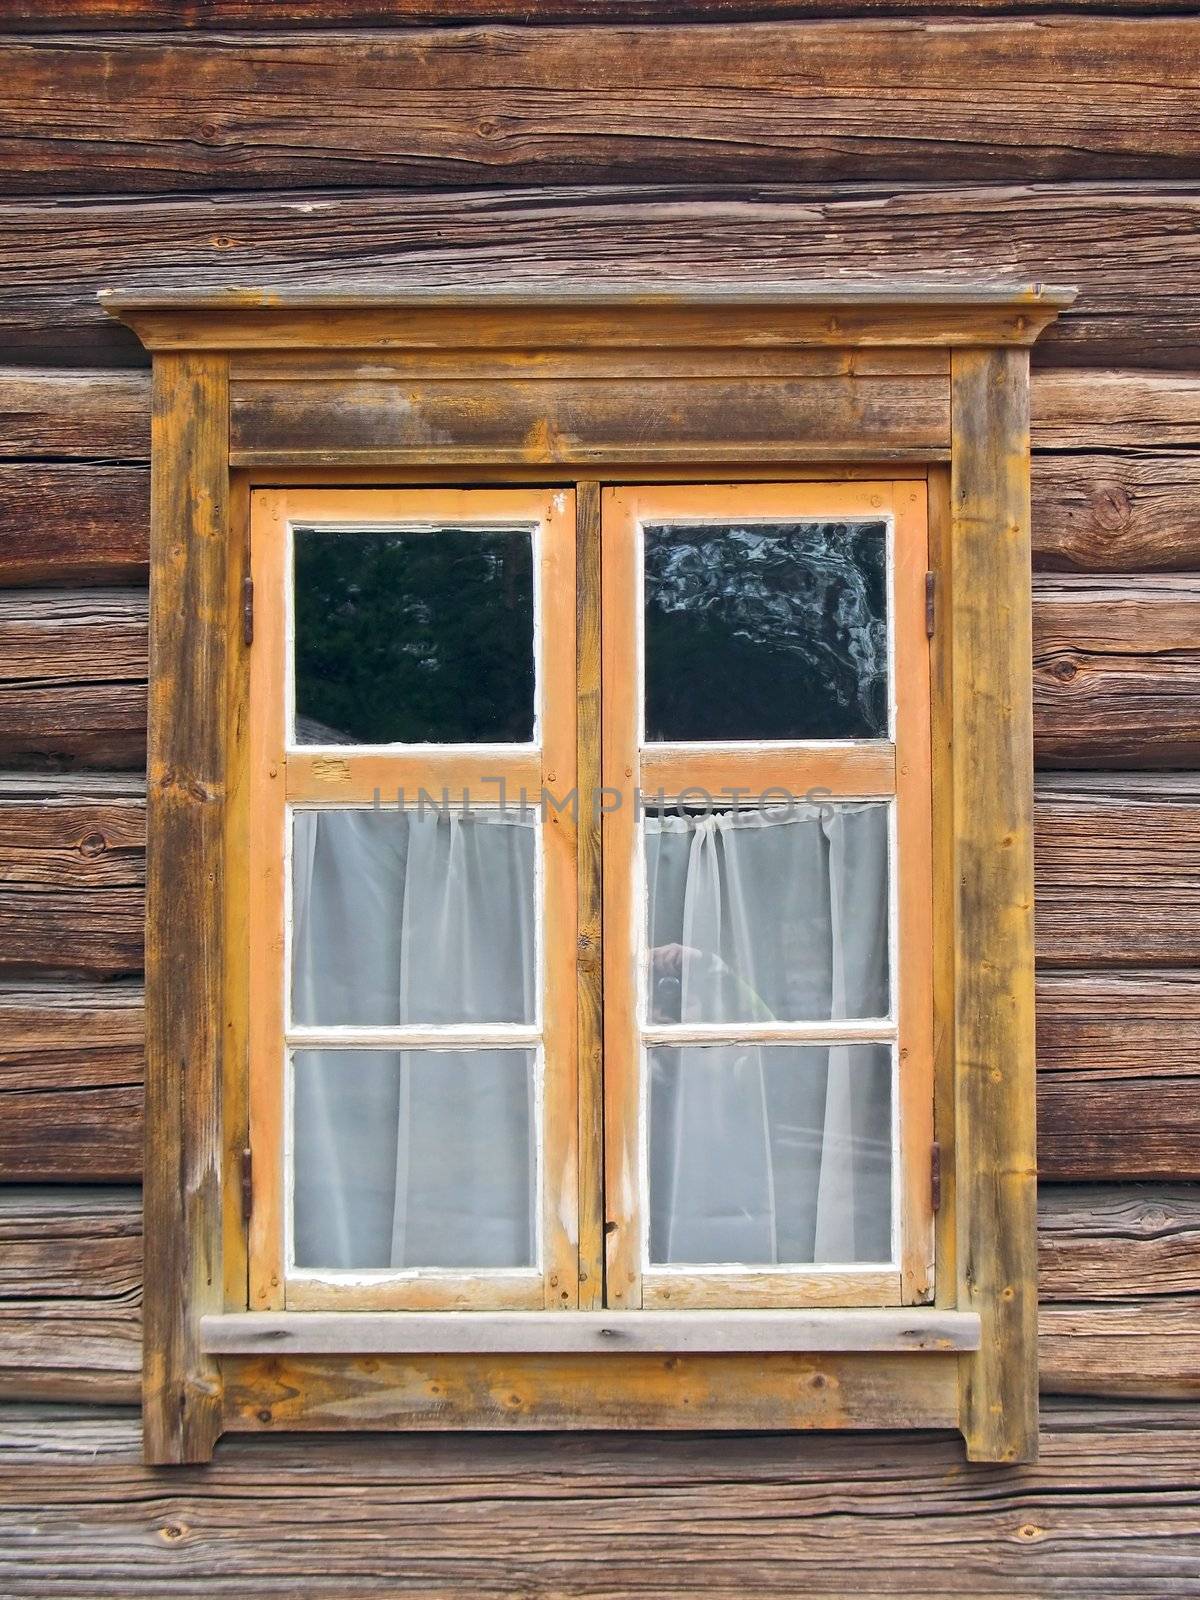 Window in old wooden wethered wall